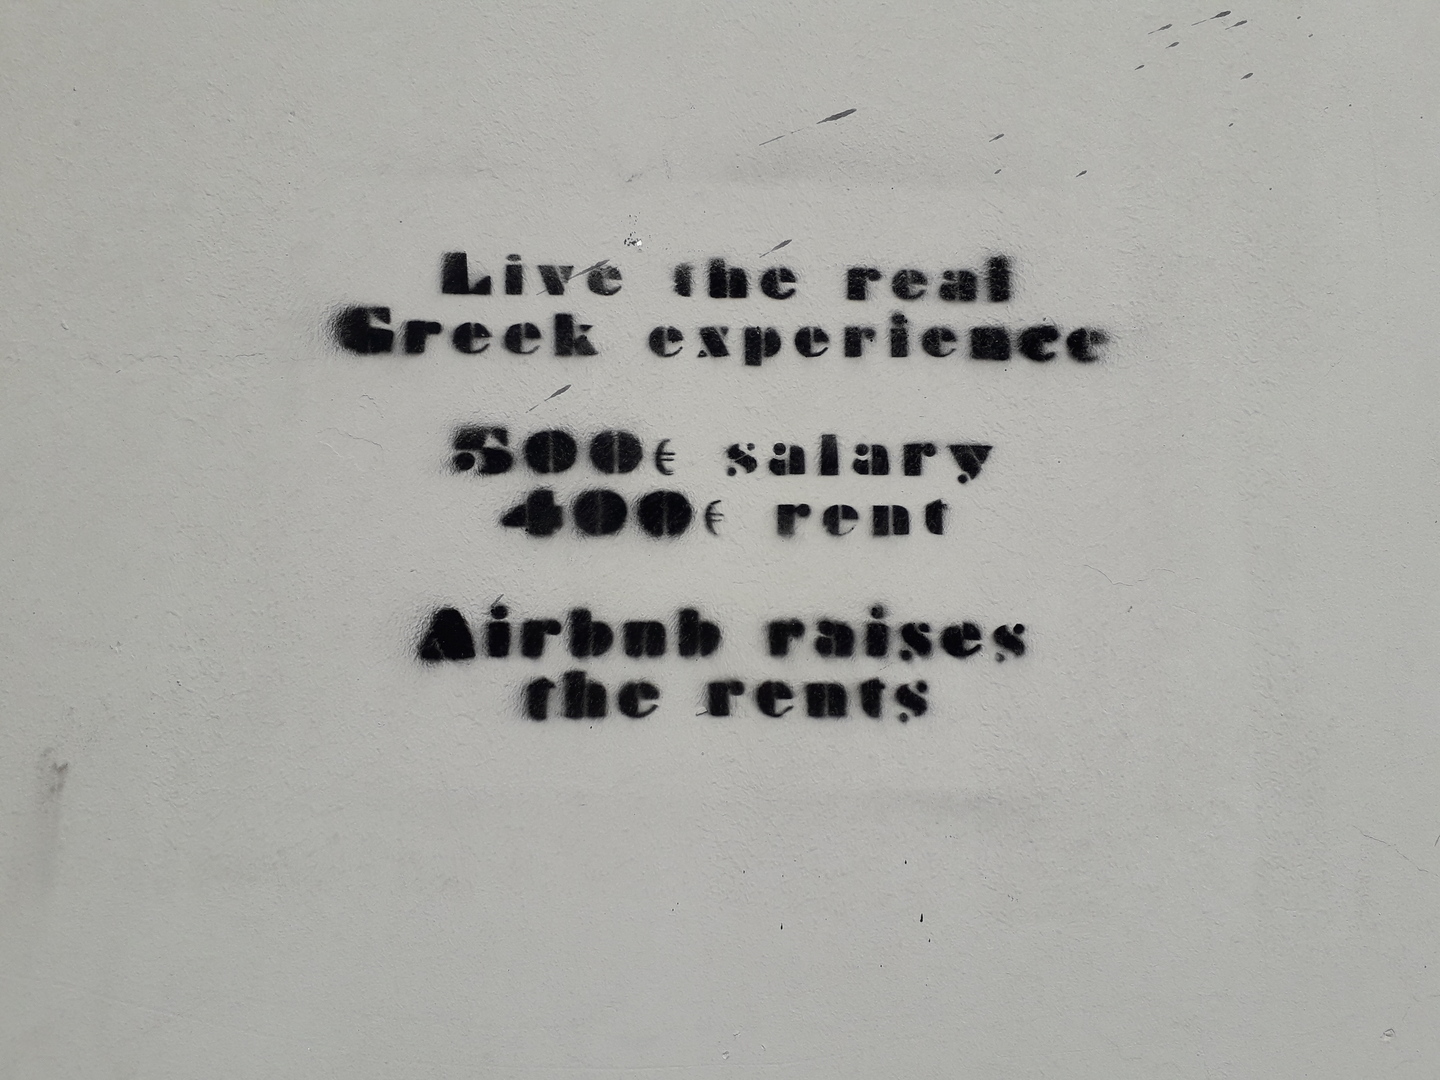 Tag avec l'inscription Live the real Greek experience 500€ salary 400€ rent Airbnb raises the rents